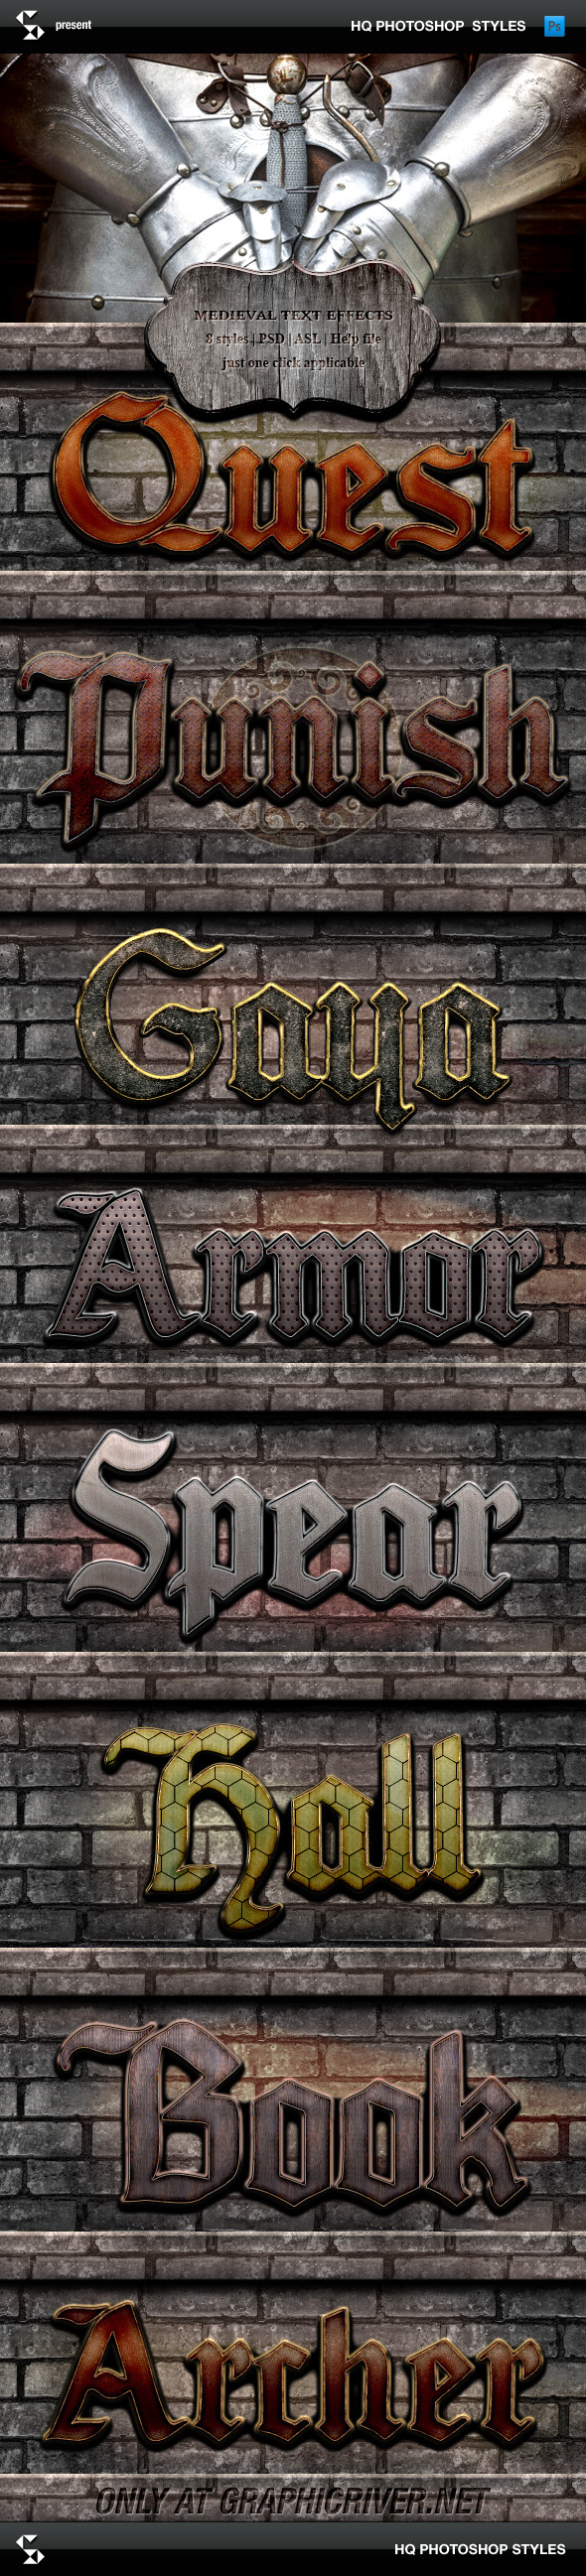 Medieval Text Effects - Medieval Game Styles